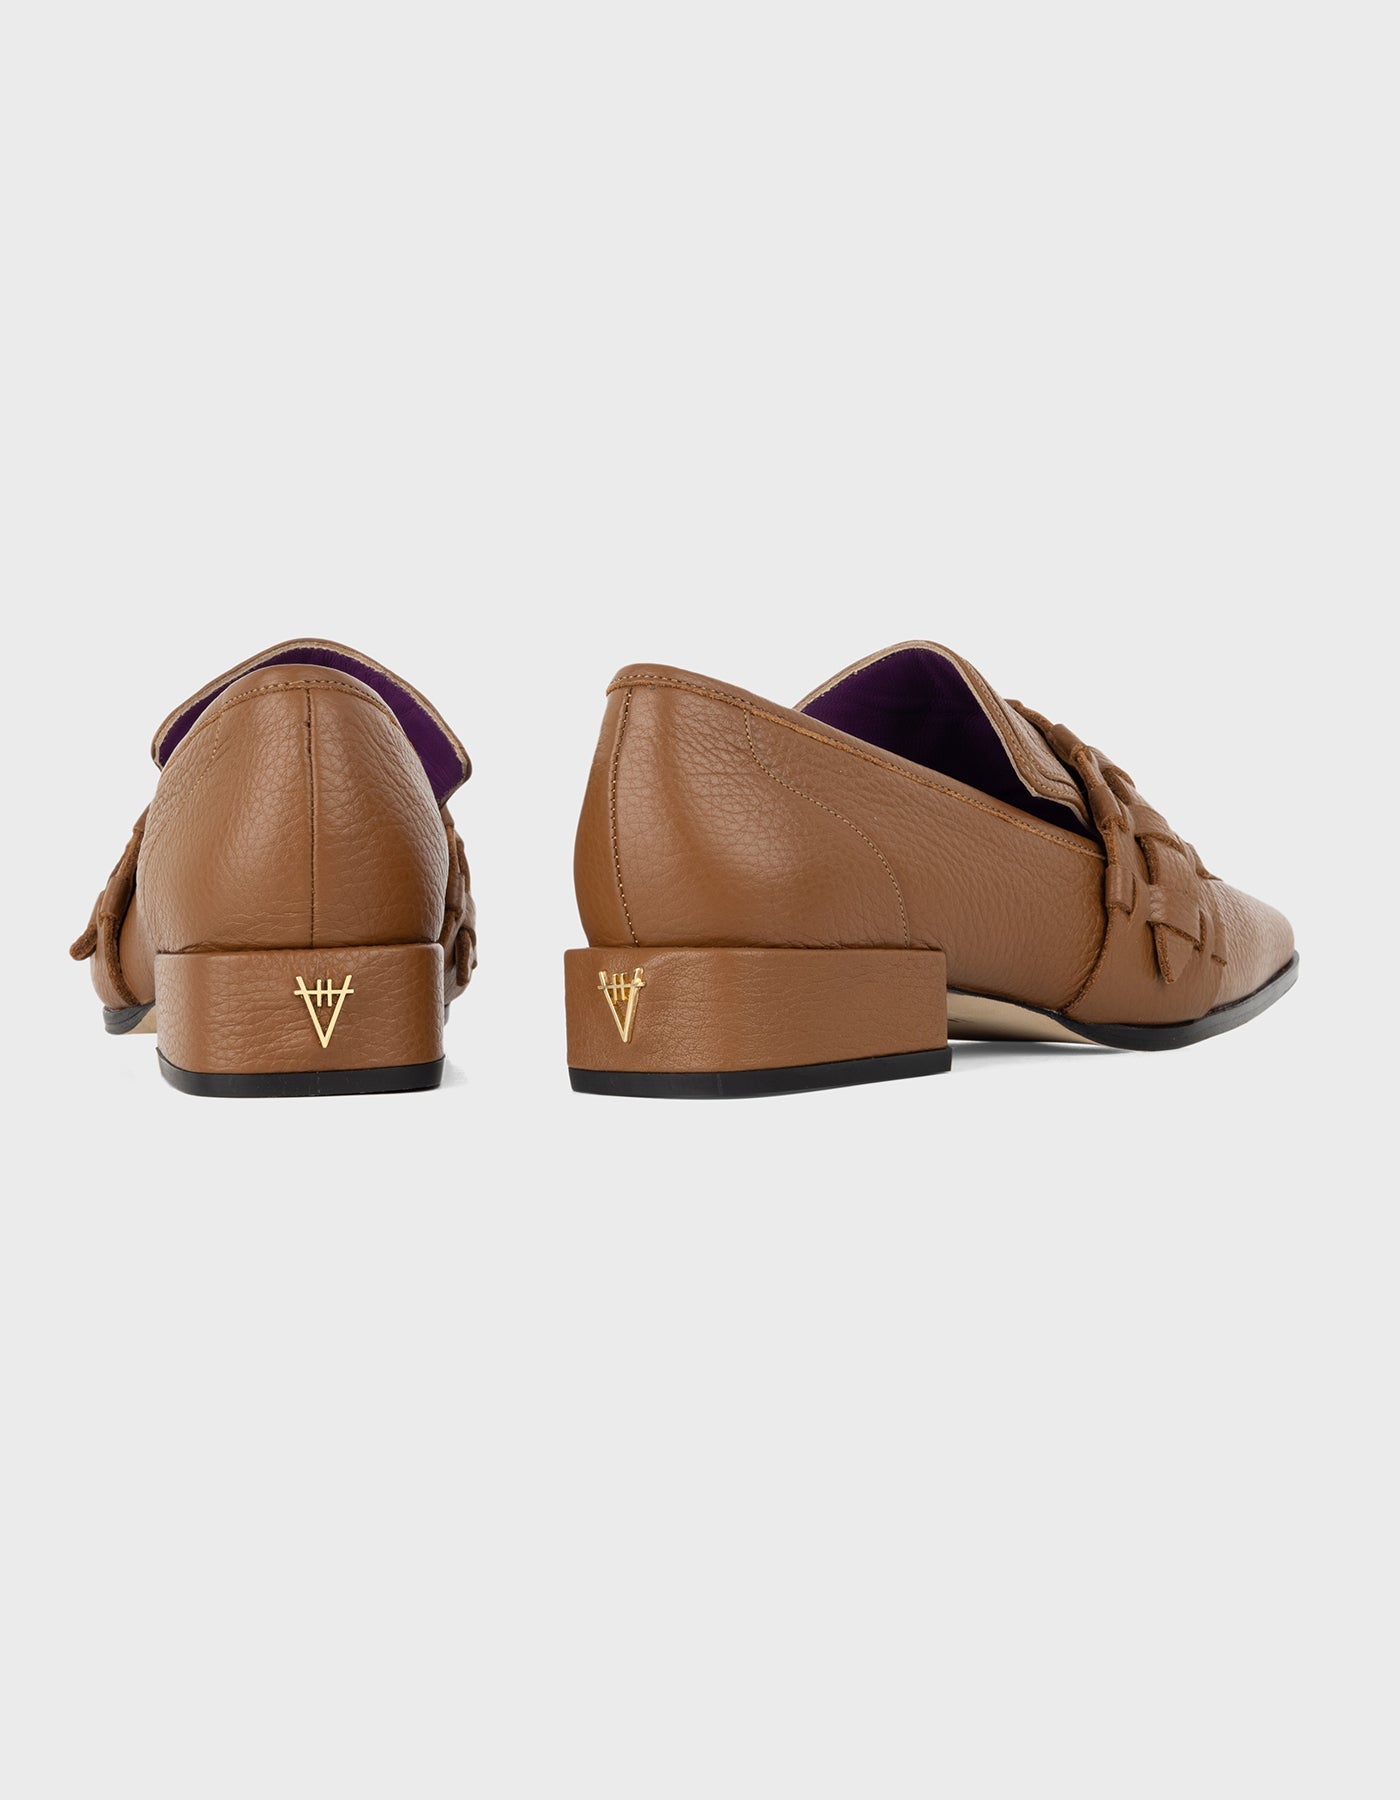 Lora Loafers - Finest Quality HiVa Atelier GmbH Leather Accessories